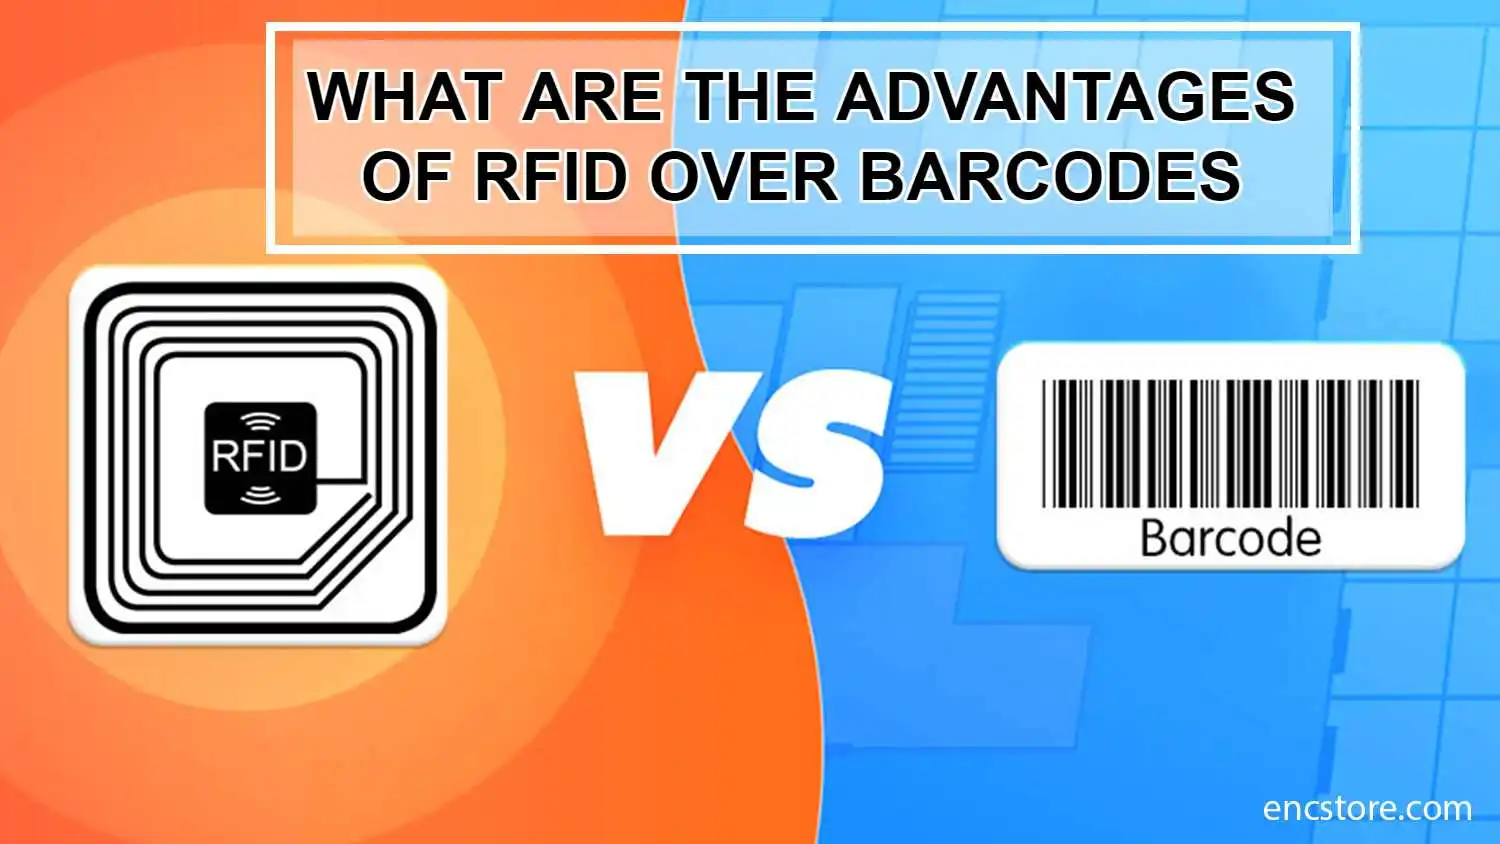 What Are The Advantages Of RFID Over Barcodes